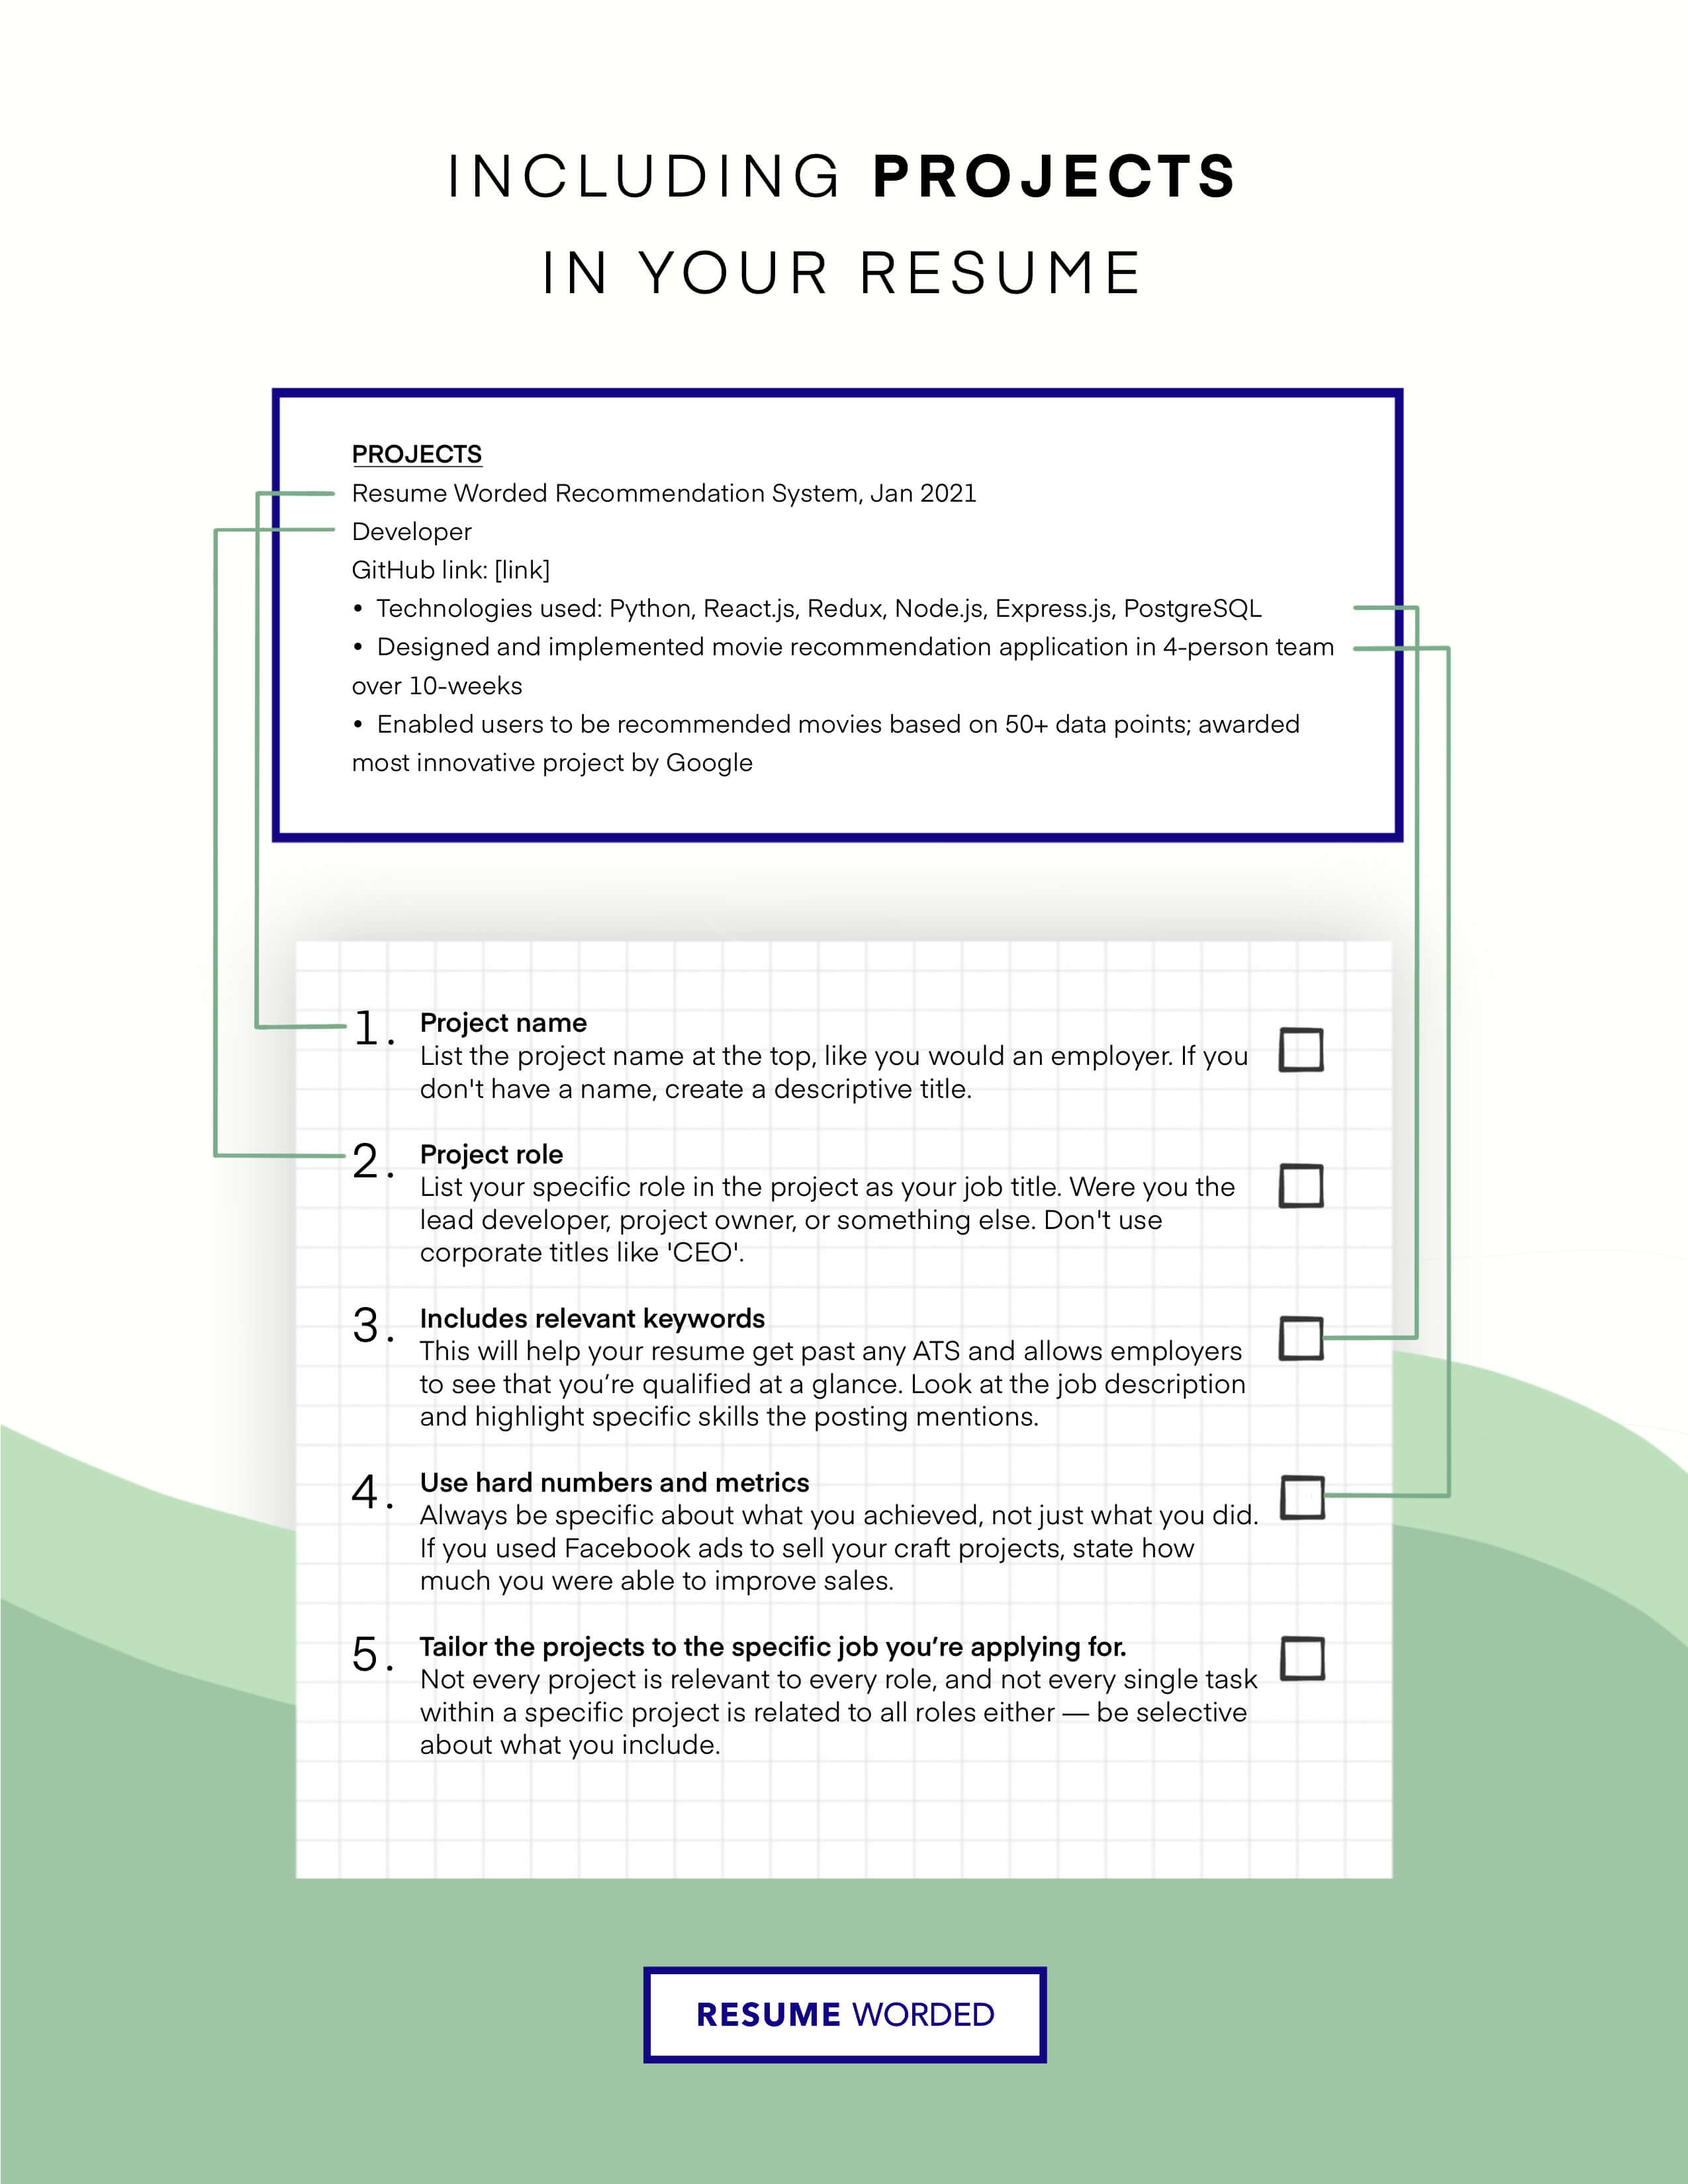 Include management-related projects in your resume. - Assistant Sales Manager Resume